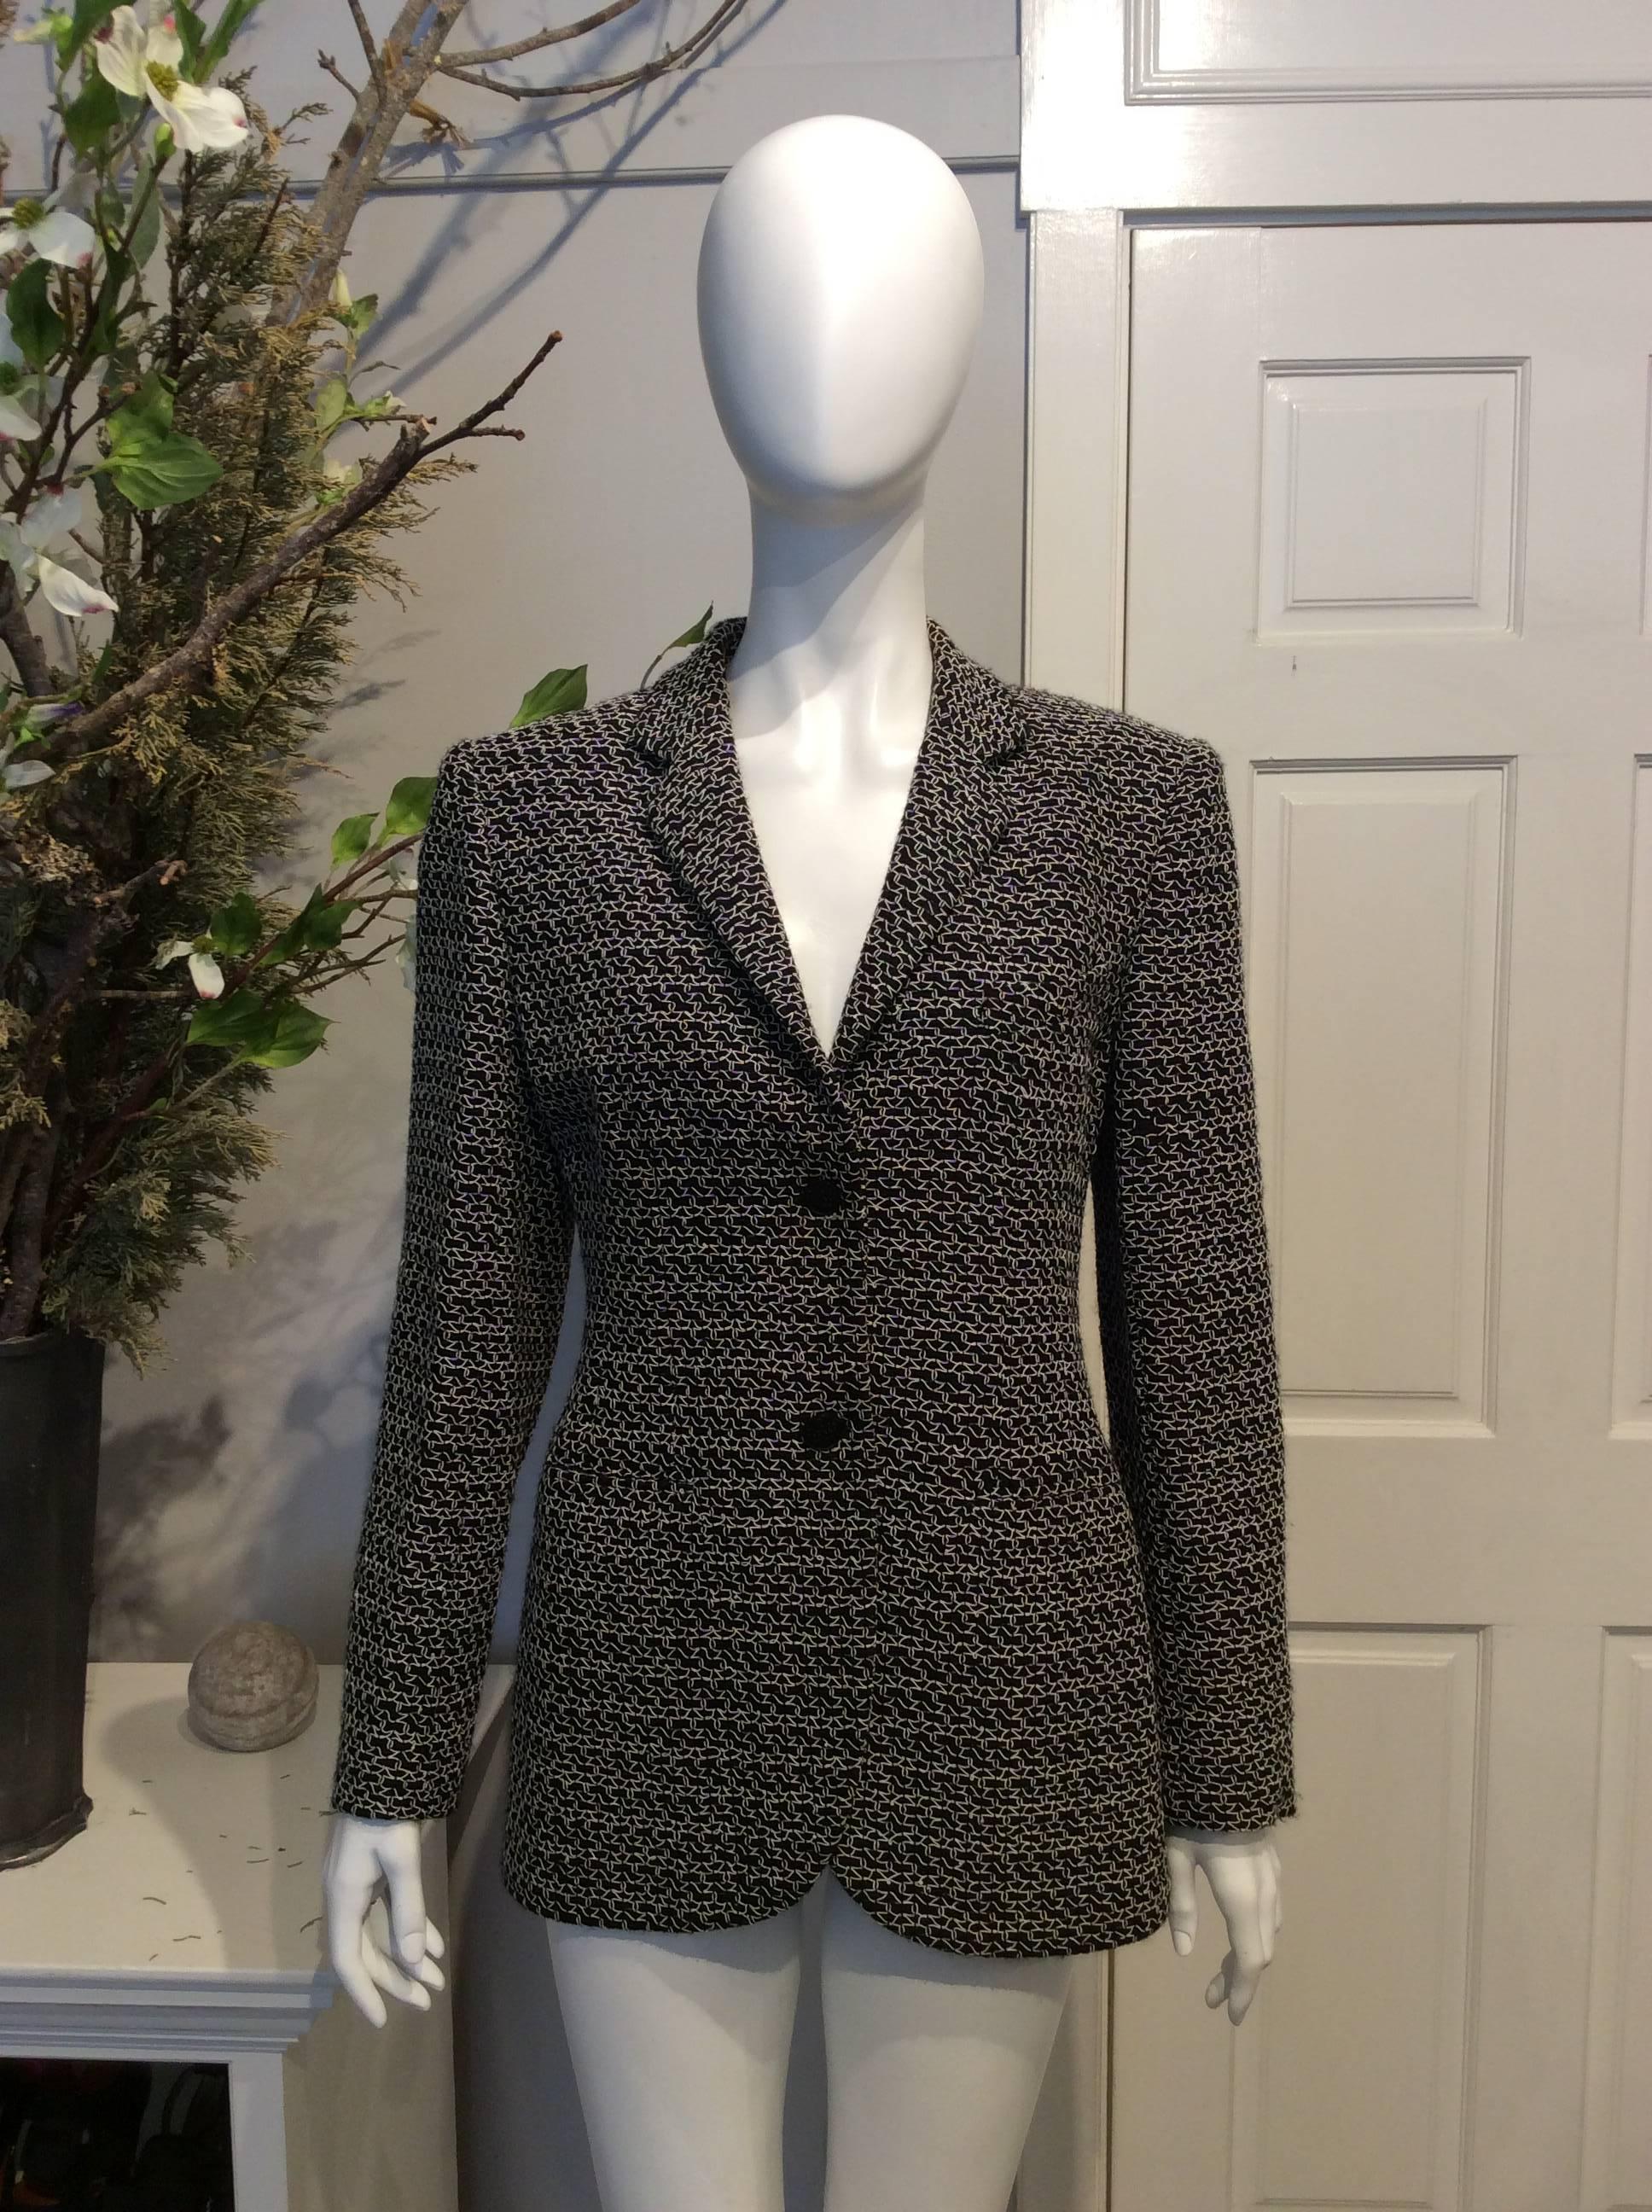 Chanel black tweed jacket with white woven, textured pattern throughout. Two black buttons at front of jacket. Single black button at each cuff. Black silk lining. Dual pockets. 

Sizing: Fr40, Us8

Fabric content: Wool, rayon, Nylon. Lining: Silk,